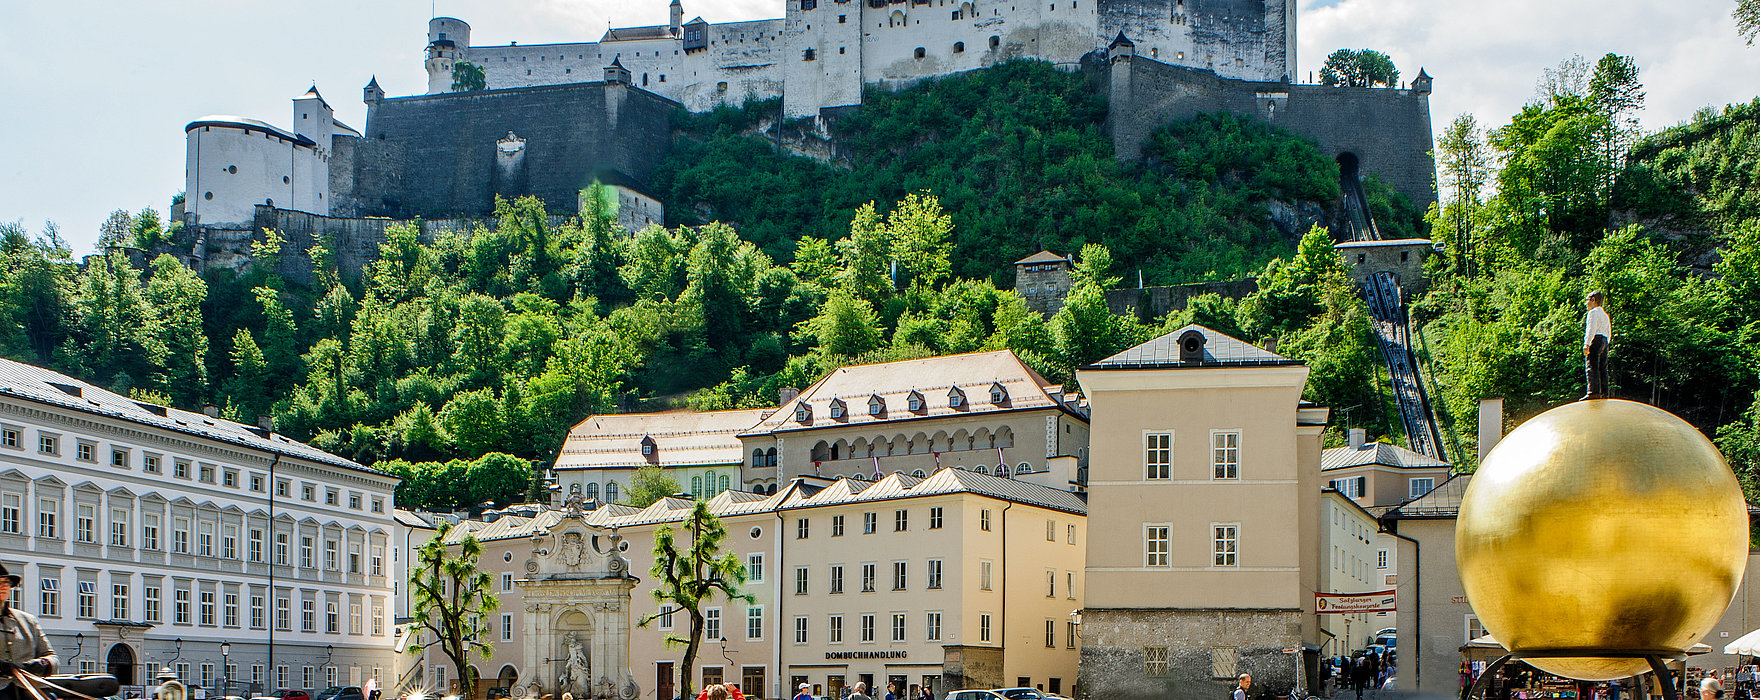 Hohensalzburg Fortress - View of the Mönchsberg and the fortress